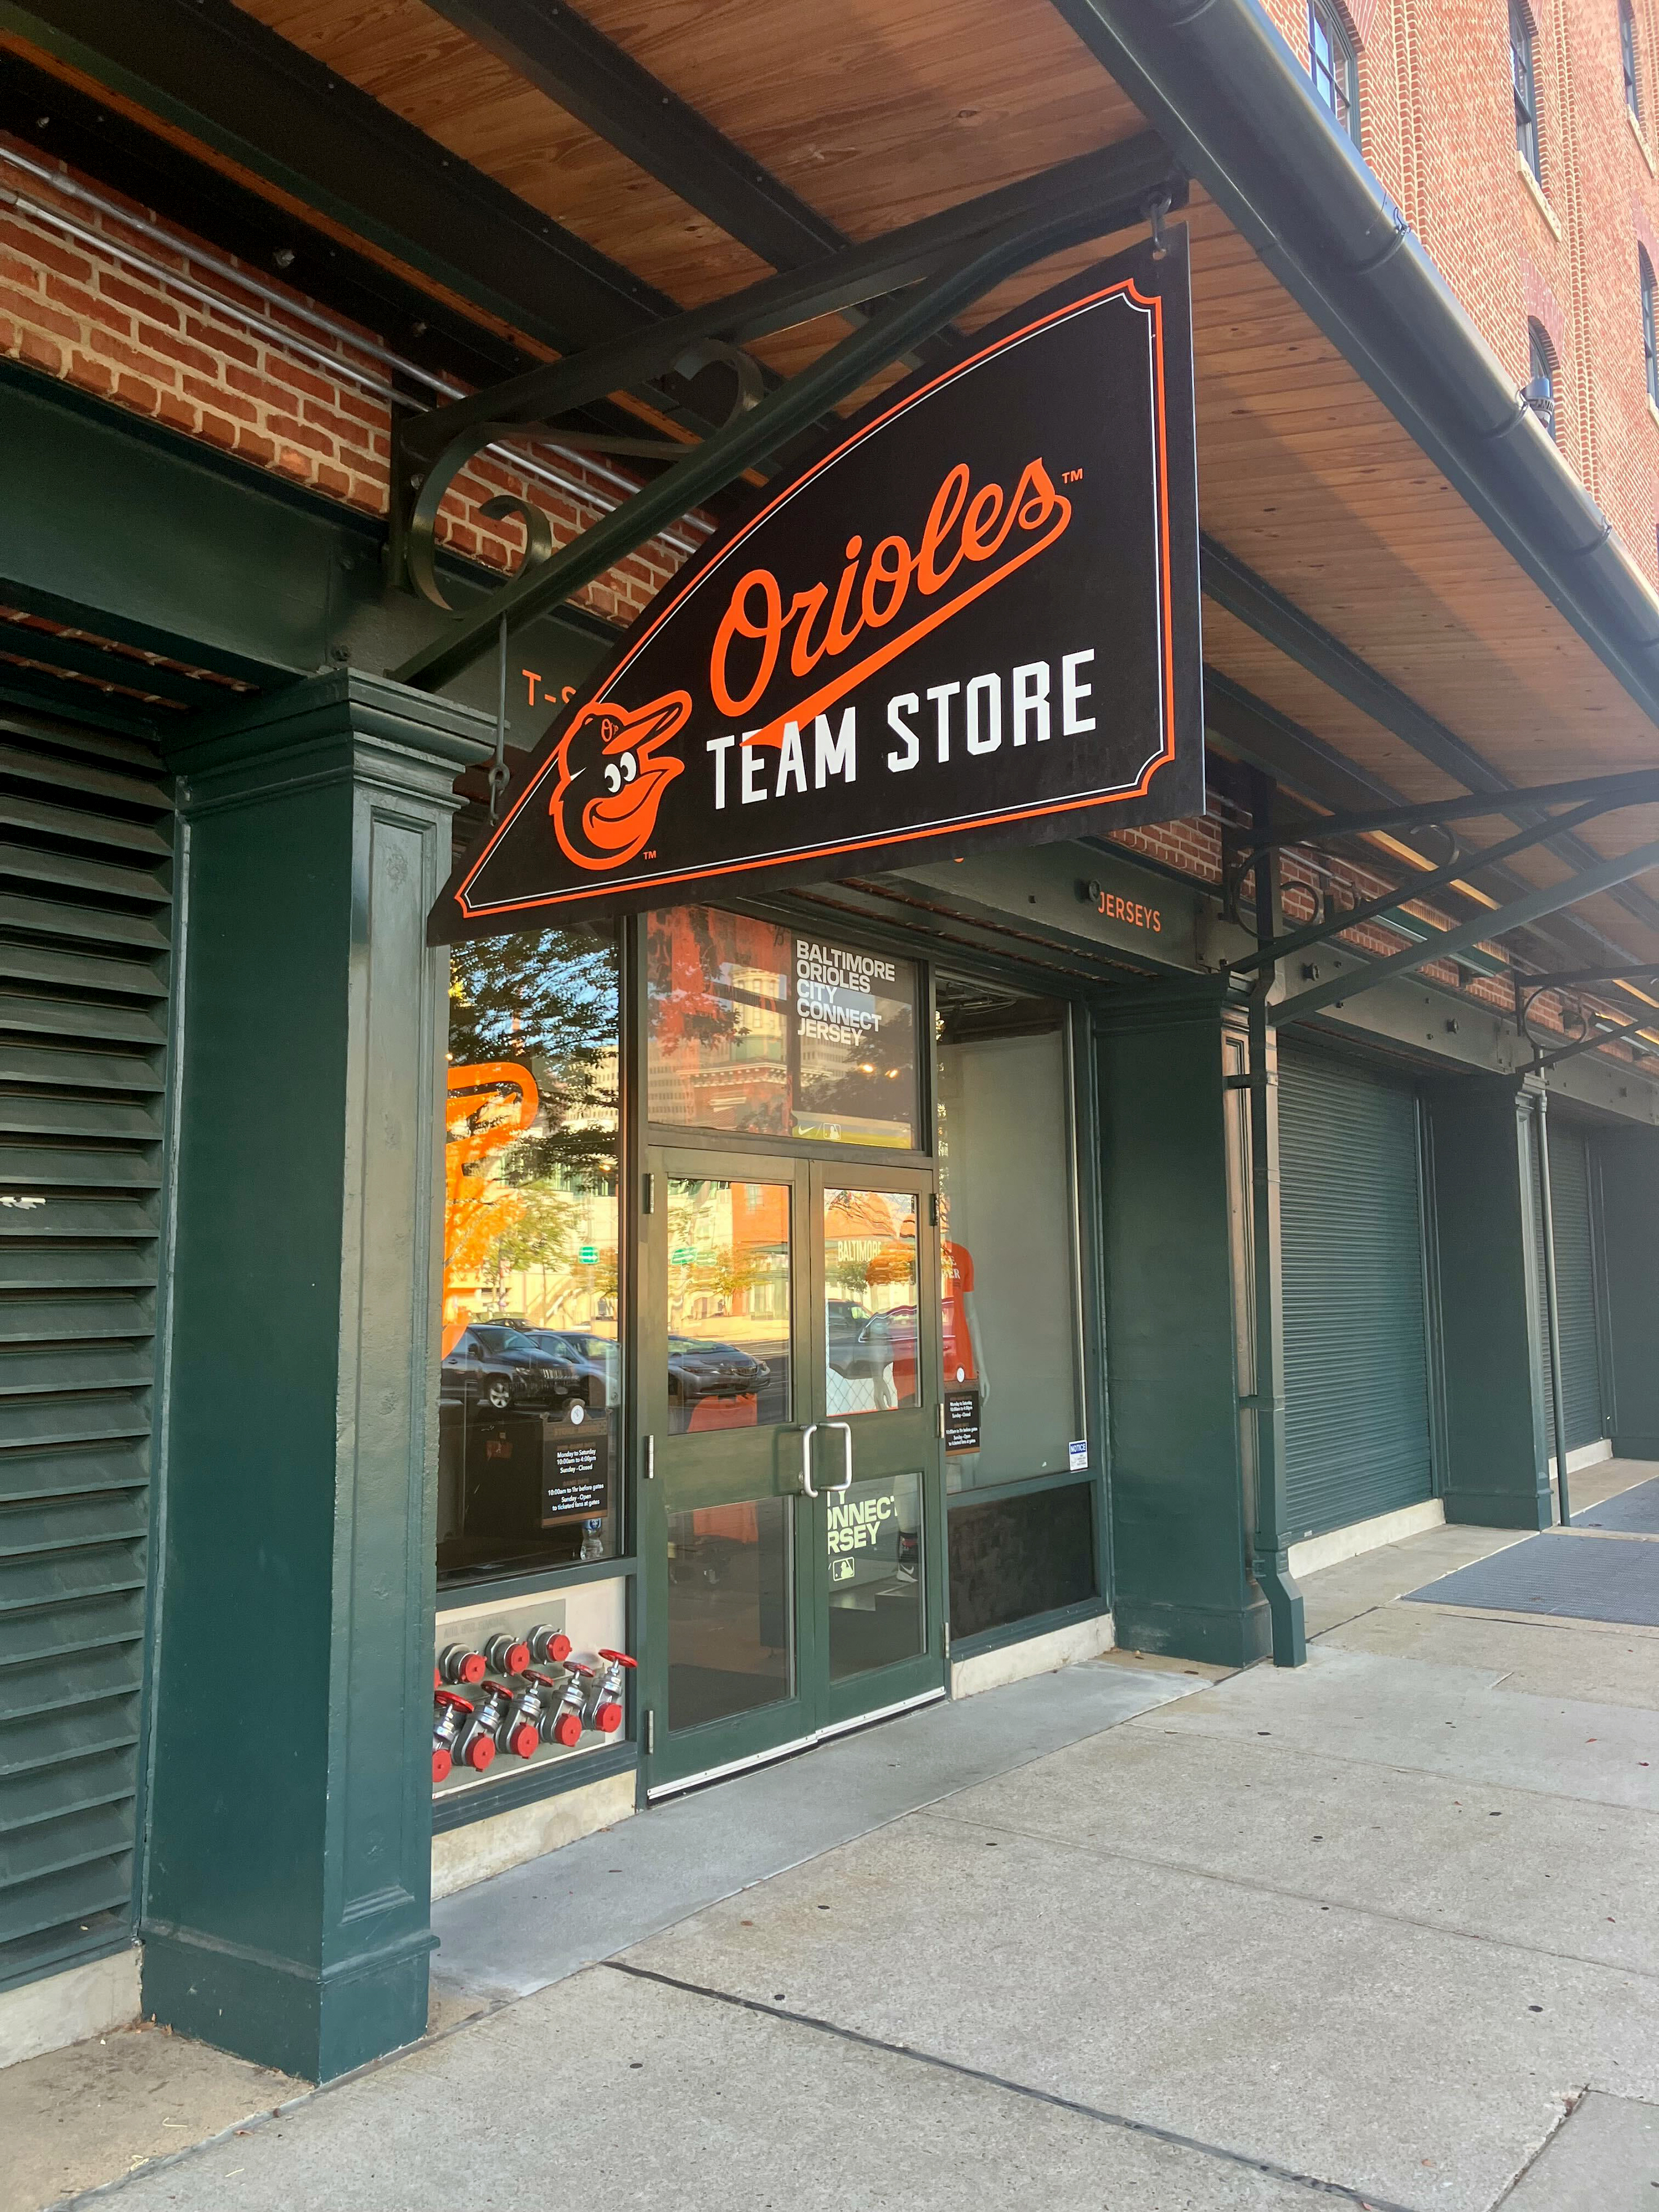 Fans line up for Orioles' City Connect jersey and merchandise